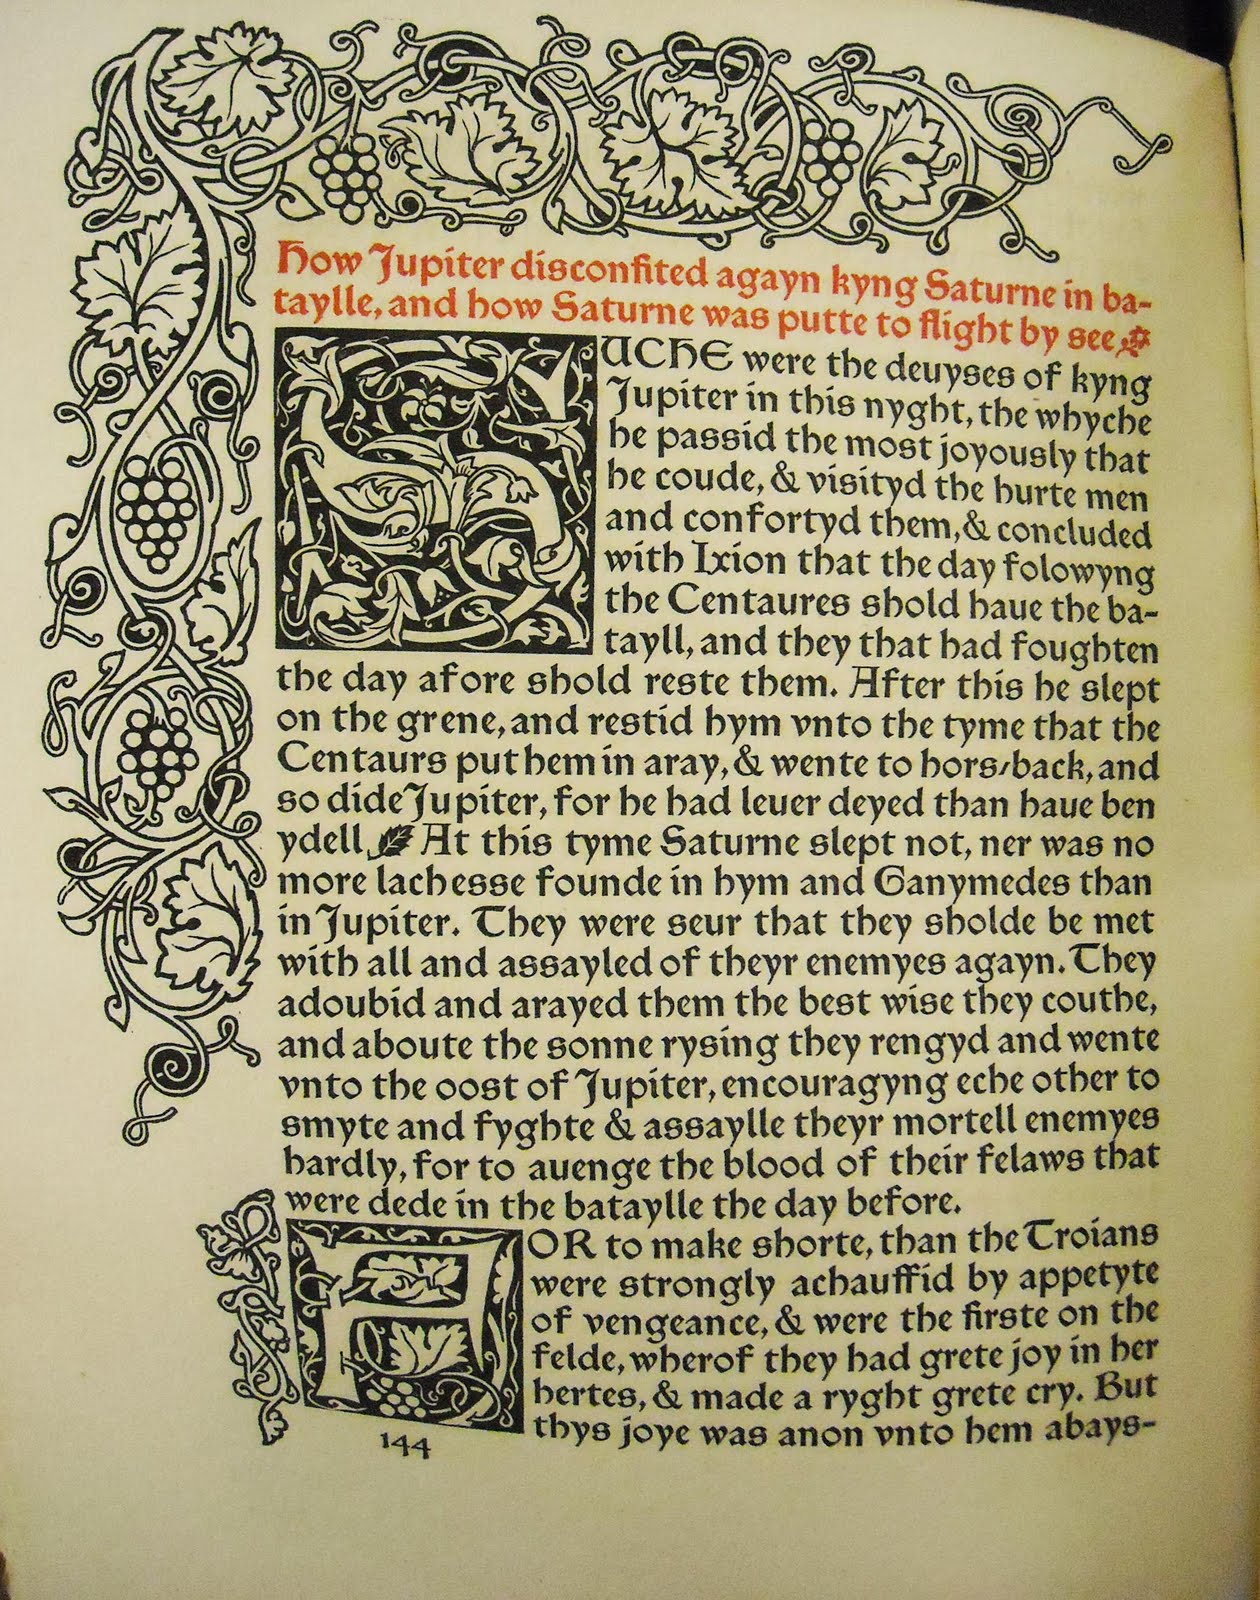 A page of The Recuyell of the Historyes of Troye with ornate vine and fruit border, two illuminated letters and orange first sentence.